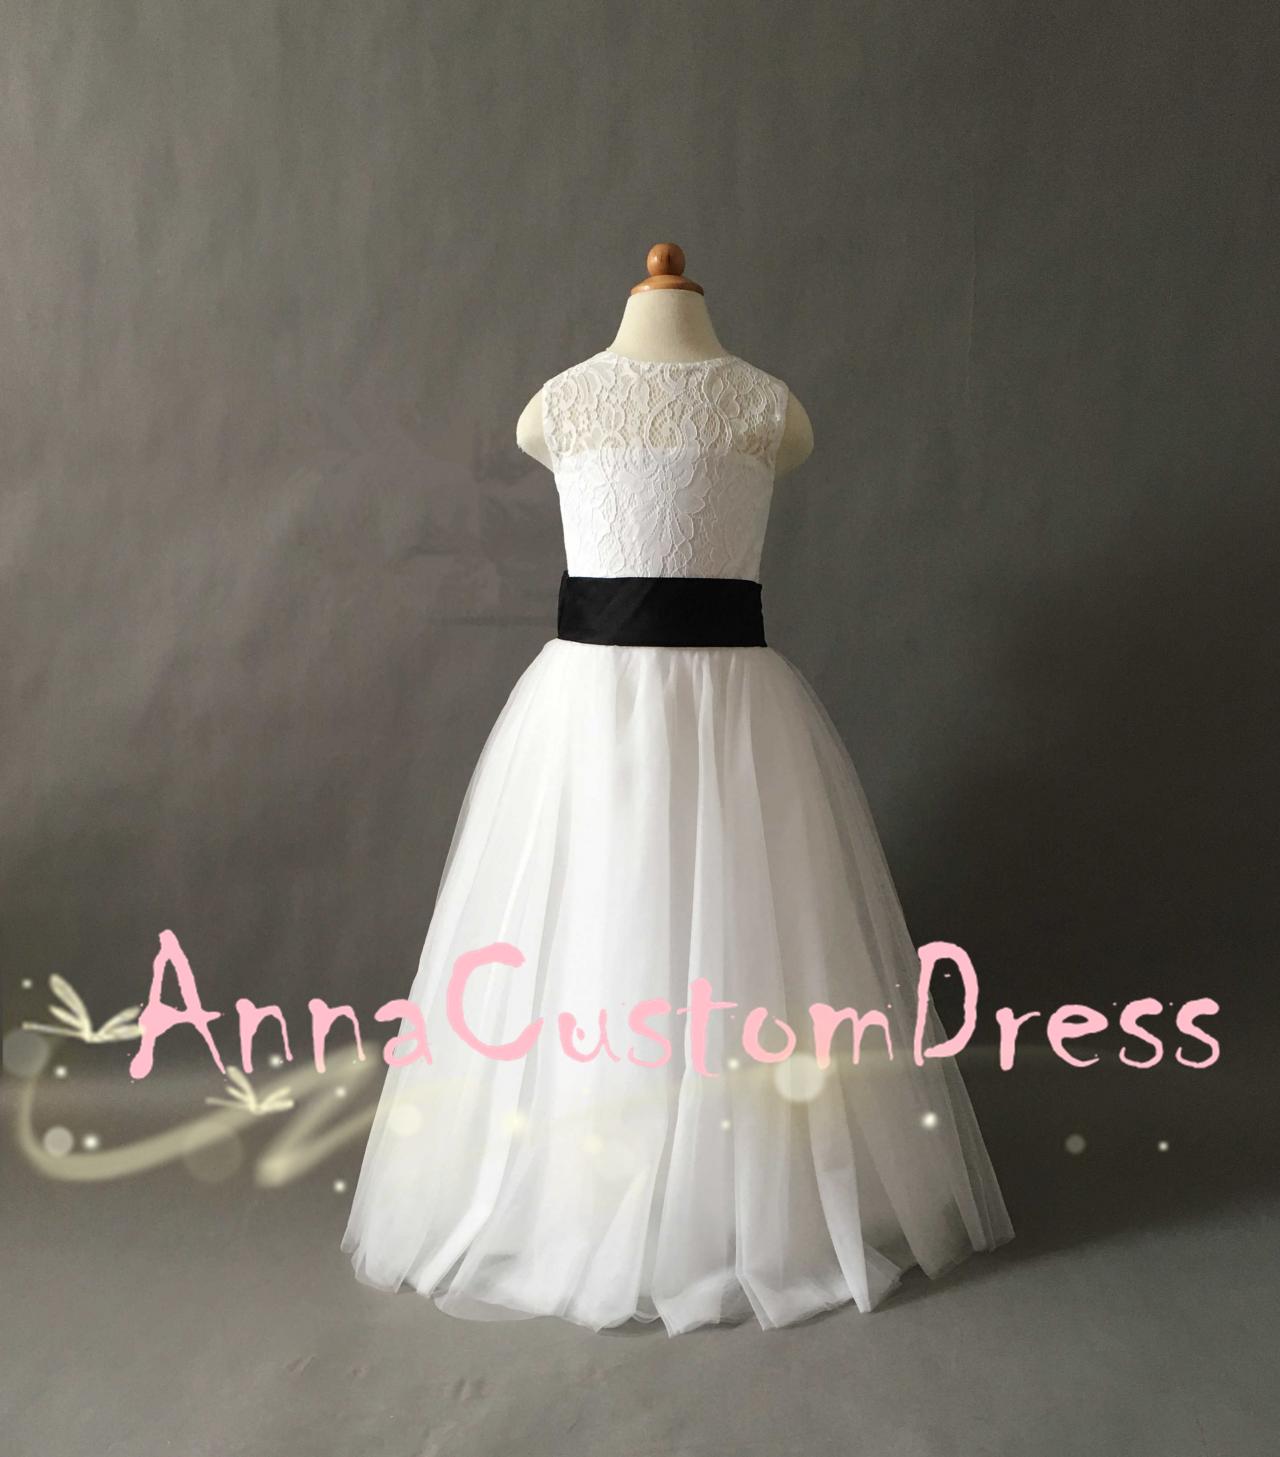 Scoop Floor-length Ivory Lace Tulle Flower Girl Dress With Black Bow